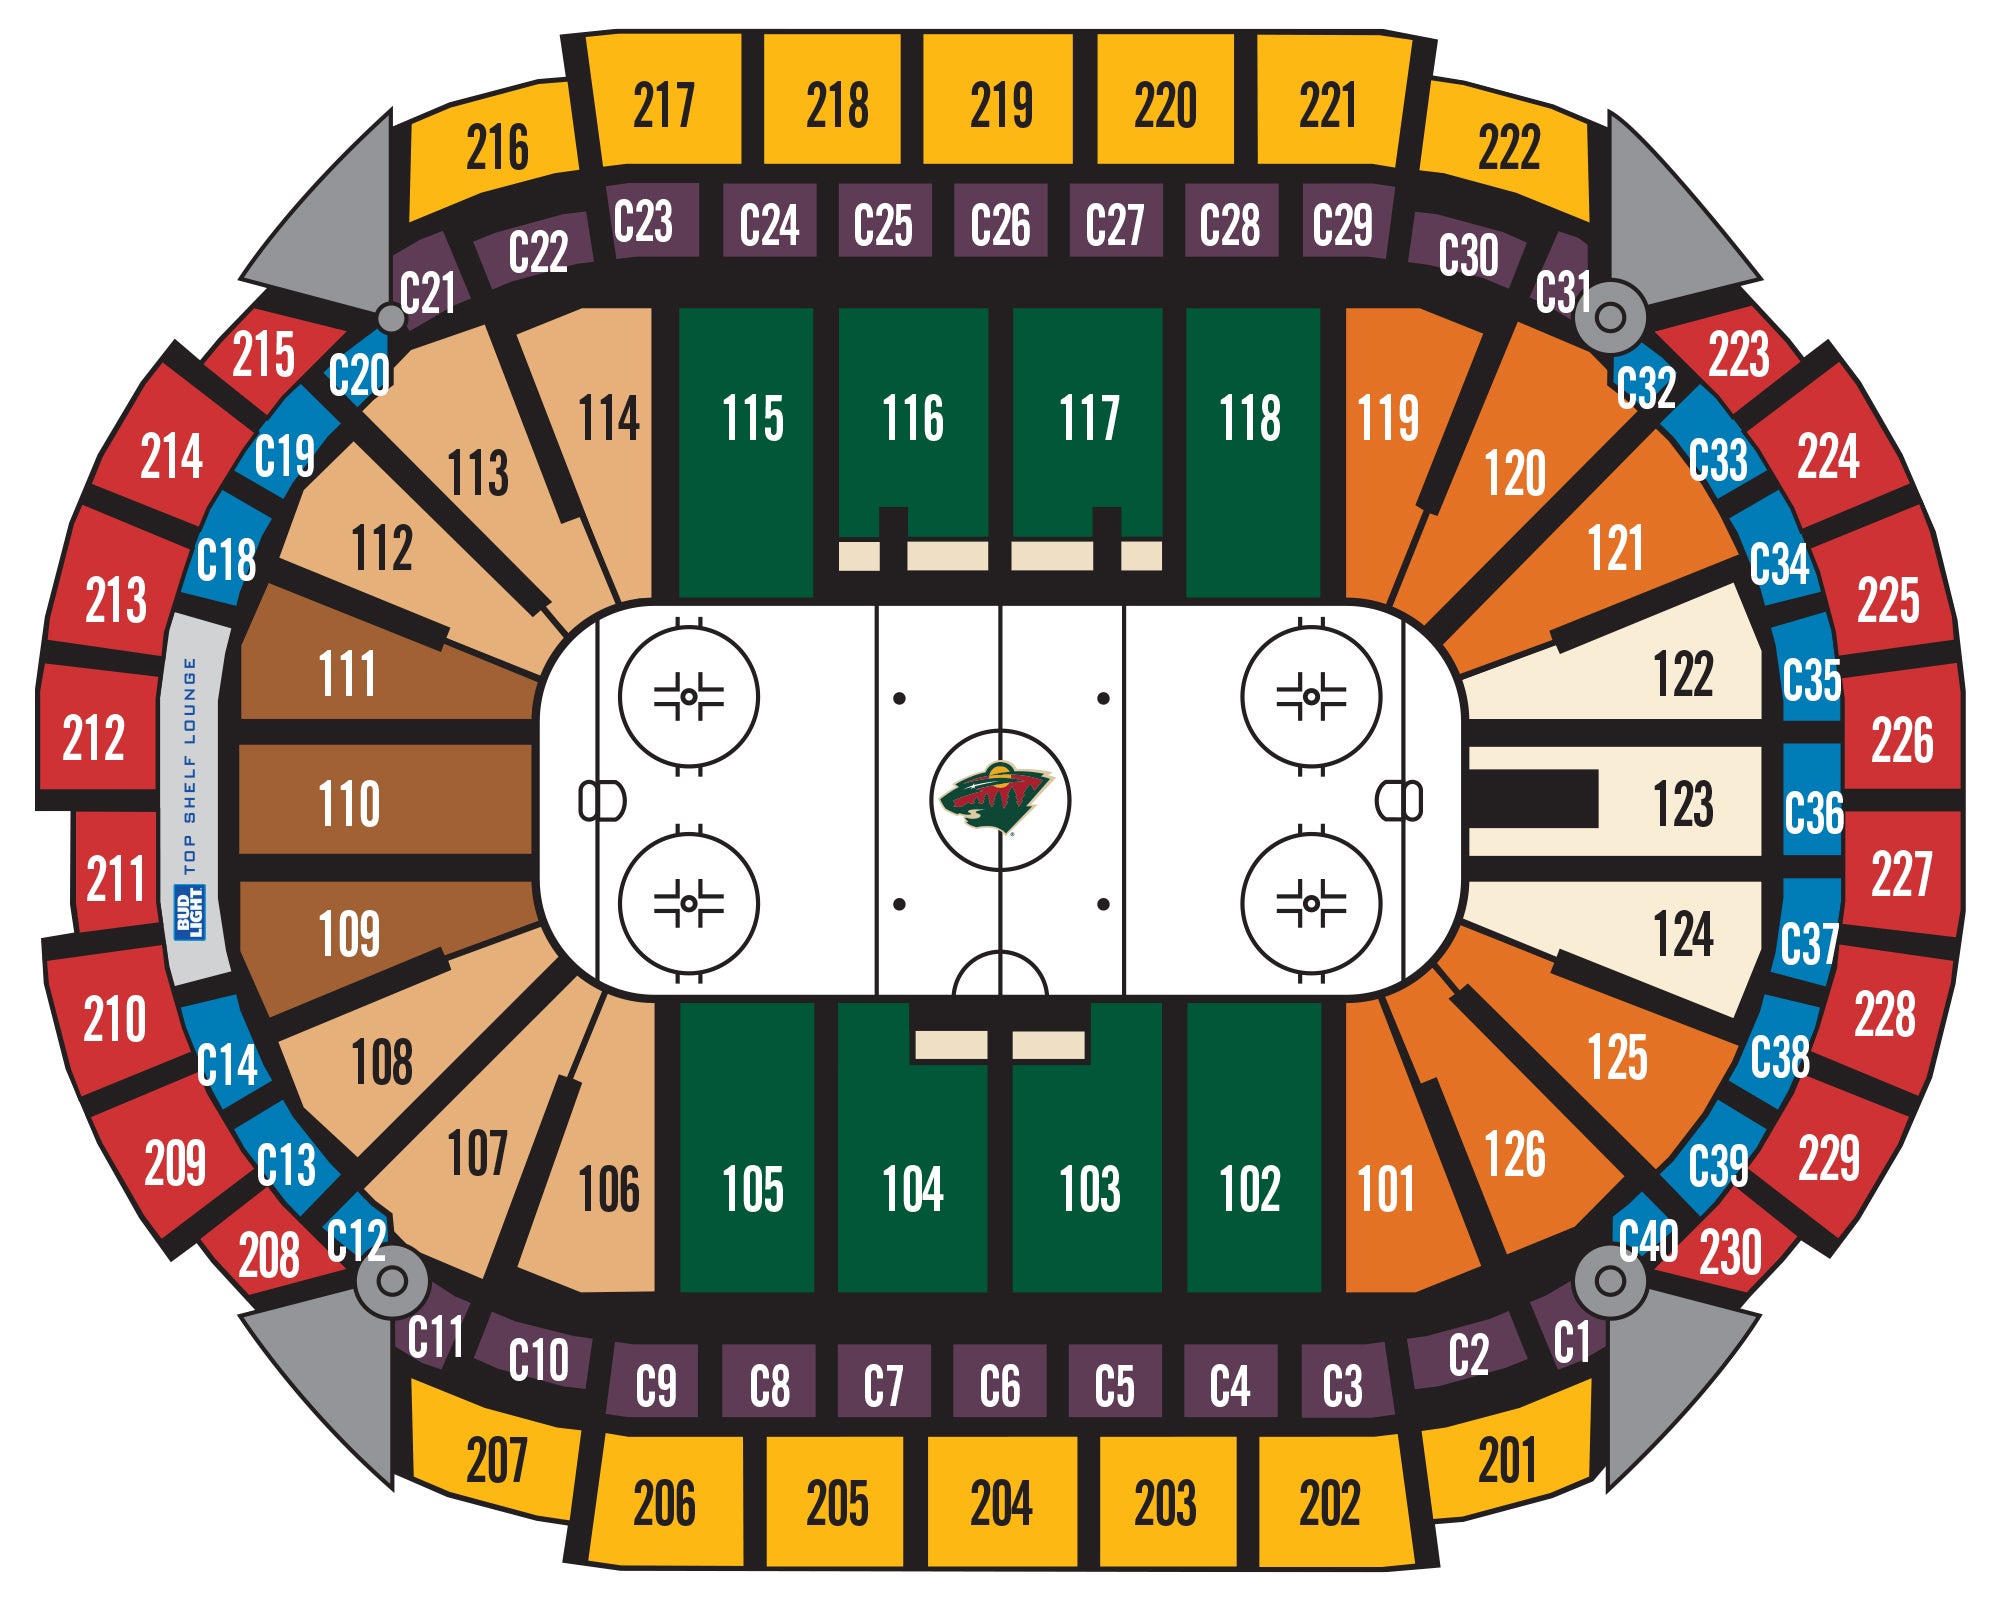 Energy Center Seating Charts Rateyourseats Com. 